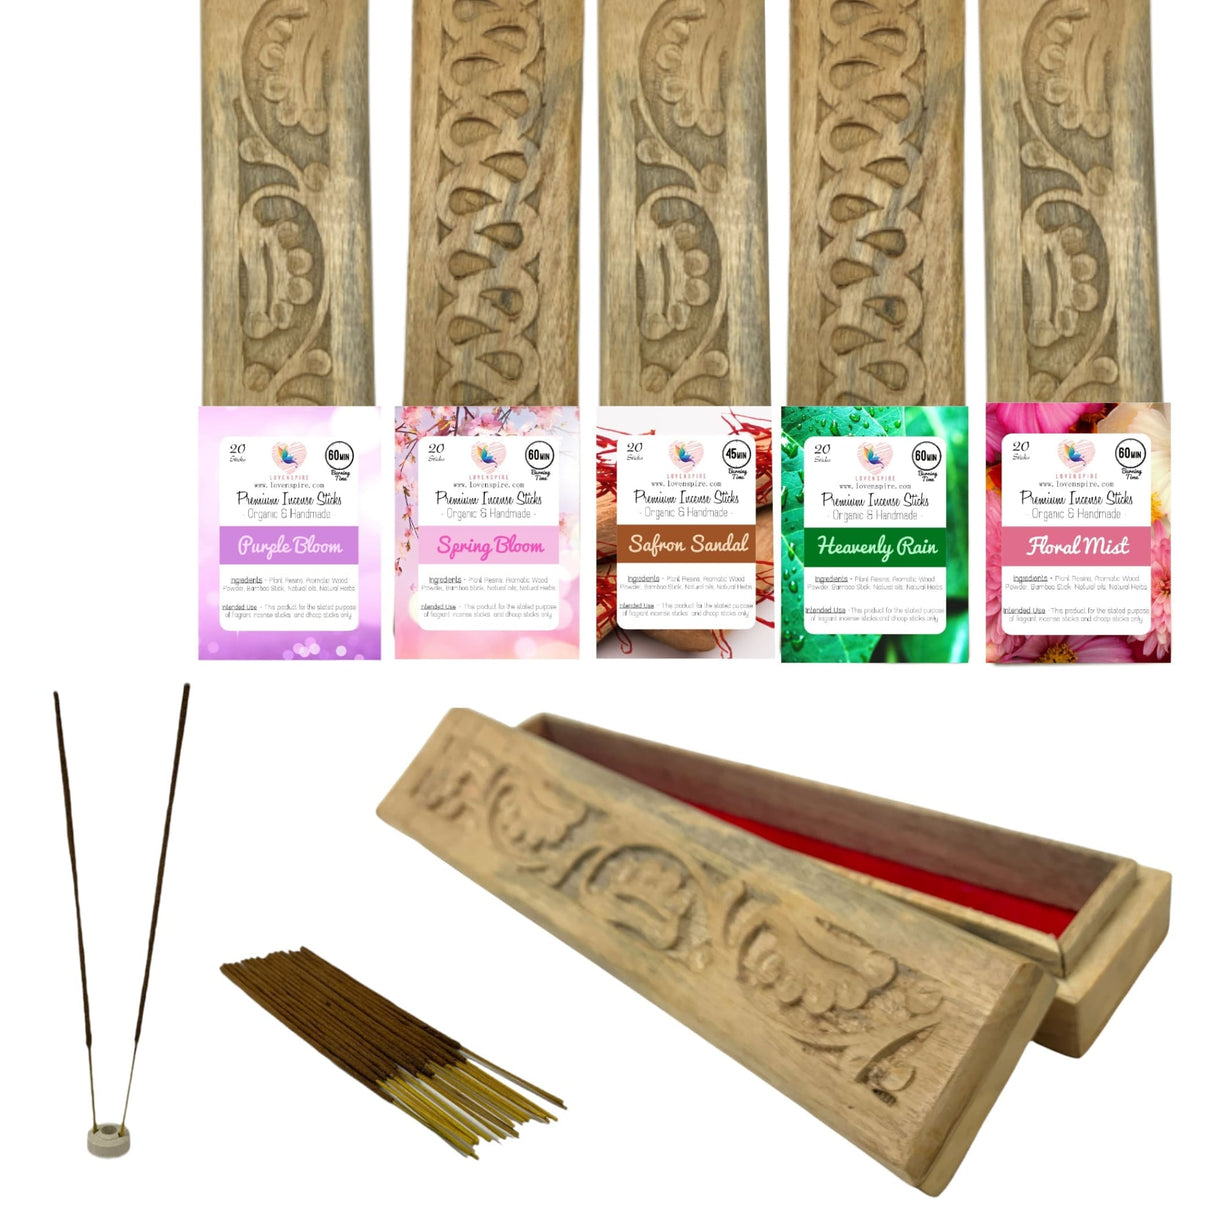 Premium scented incense stick plain kit with wooden box